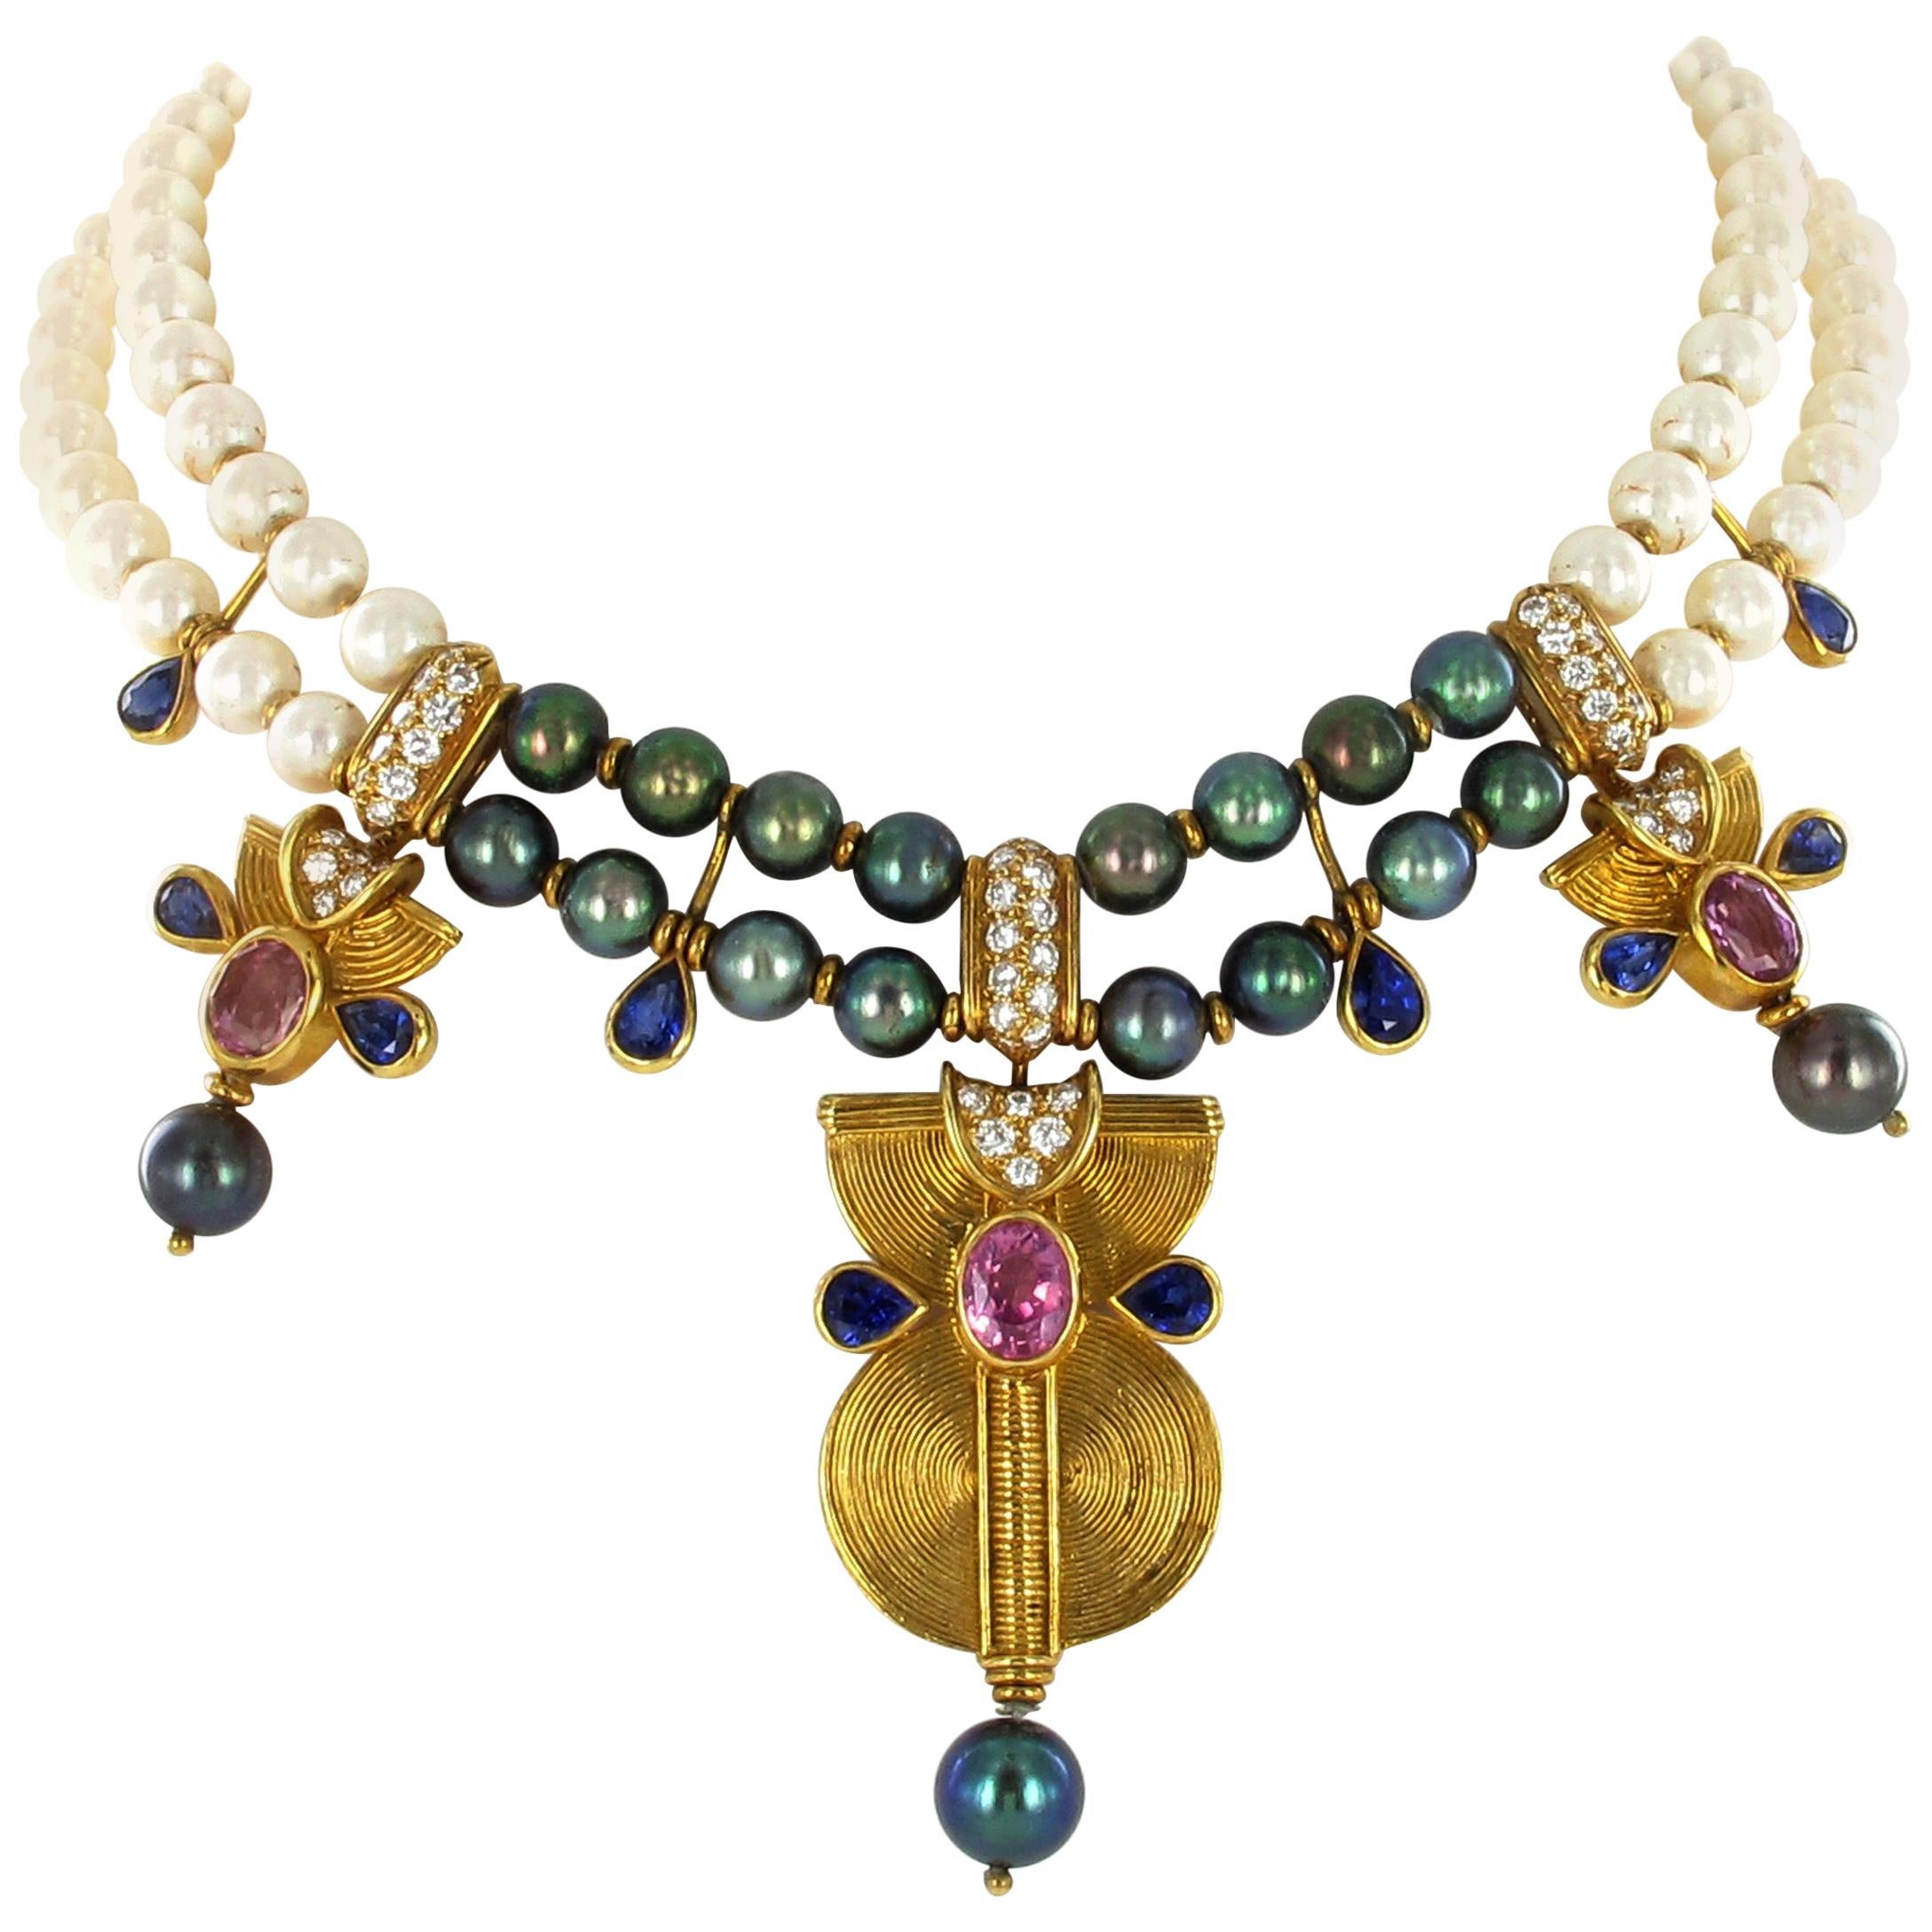 Fabulous Boucheron Cultured Pearl, Sapphire, and Diamond Necklace in Yellow Gold